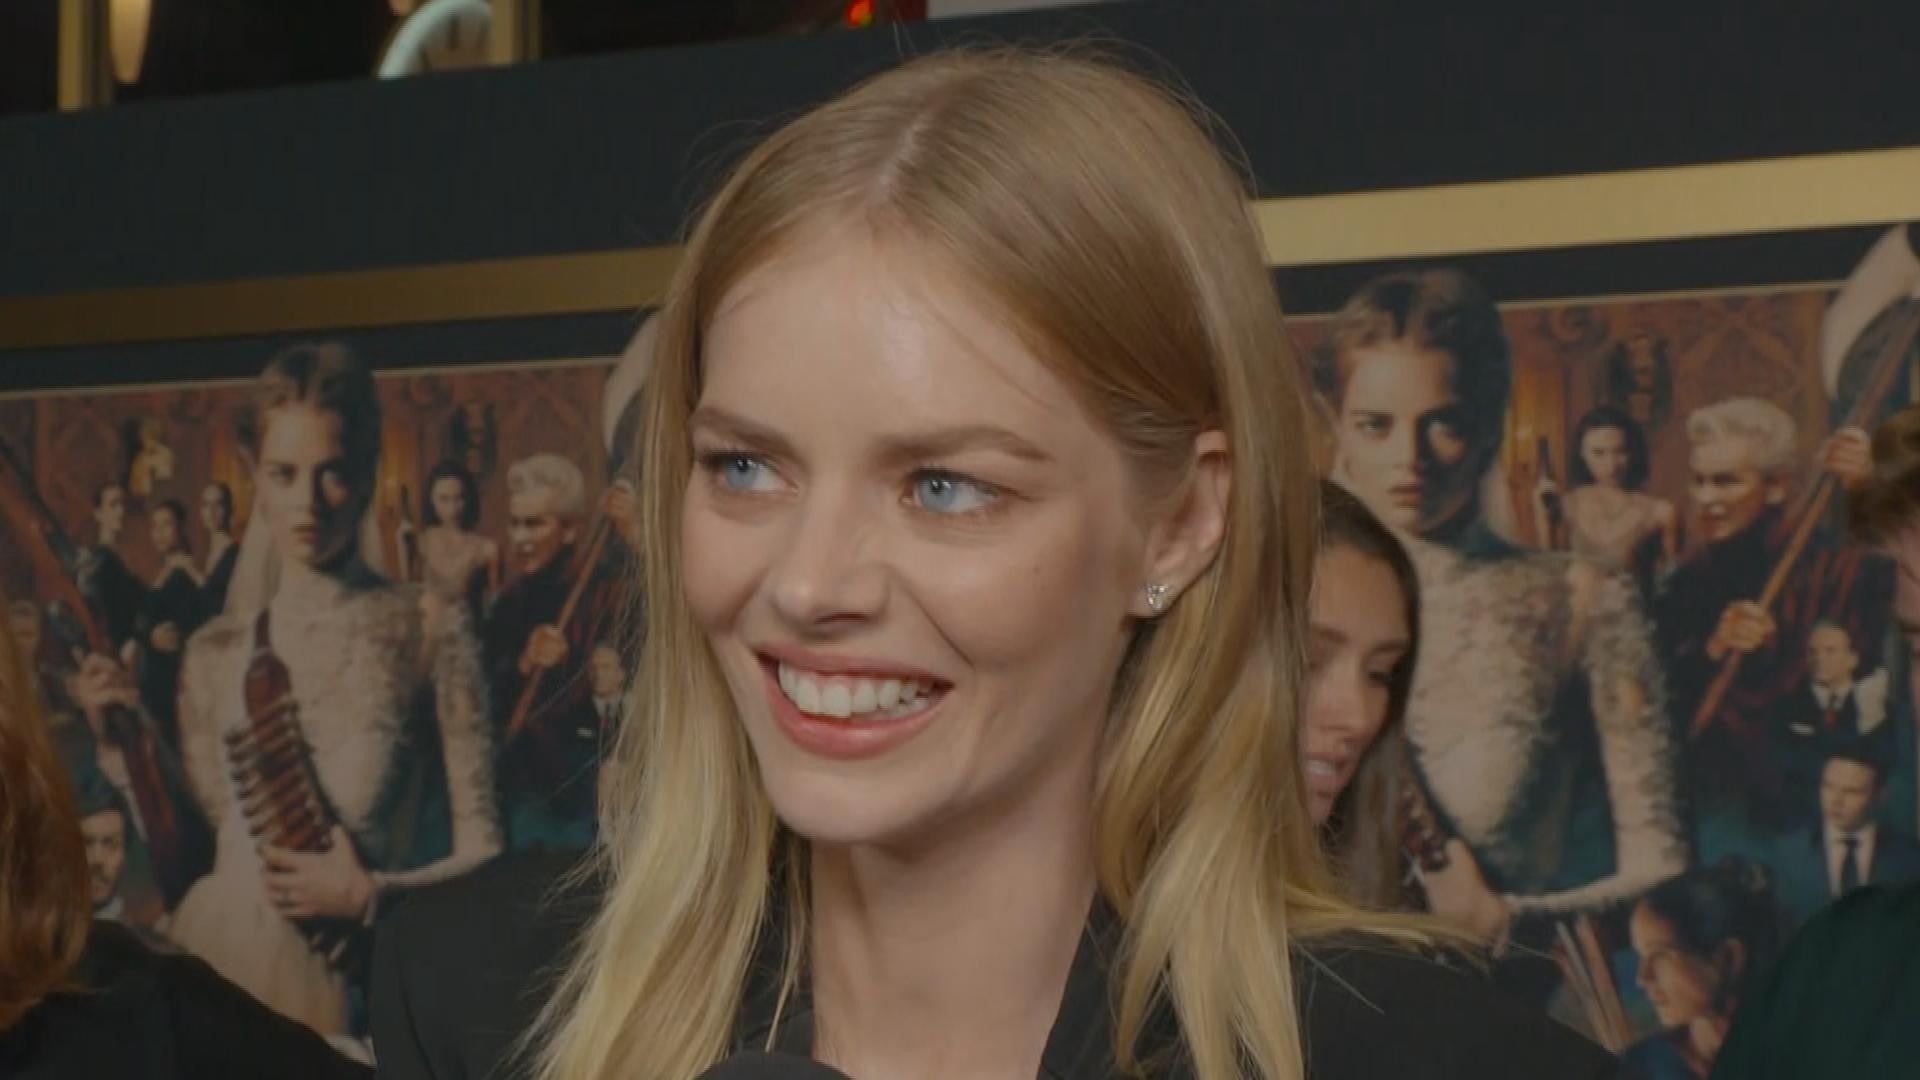 Samara Weaving Dishes on Filming 'Bill & Ted 3' With 'Gentleman